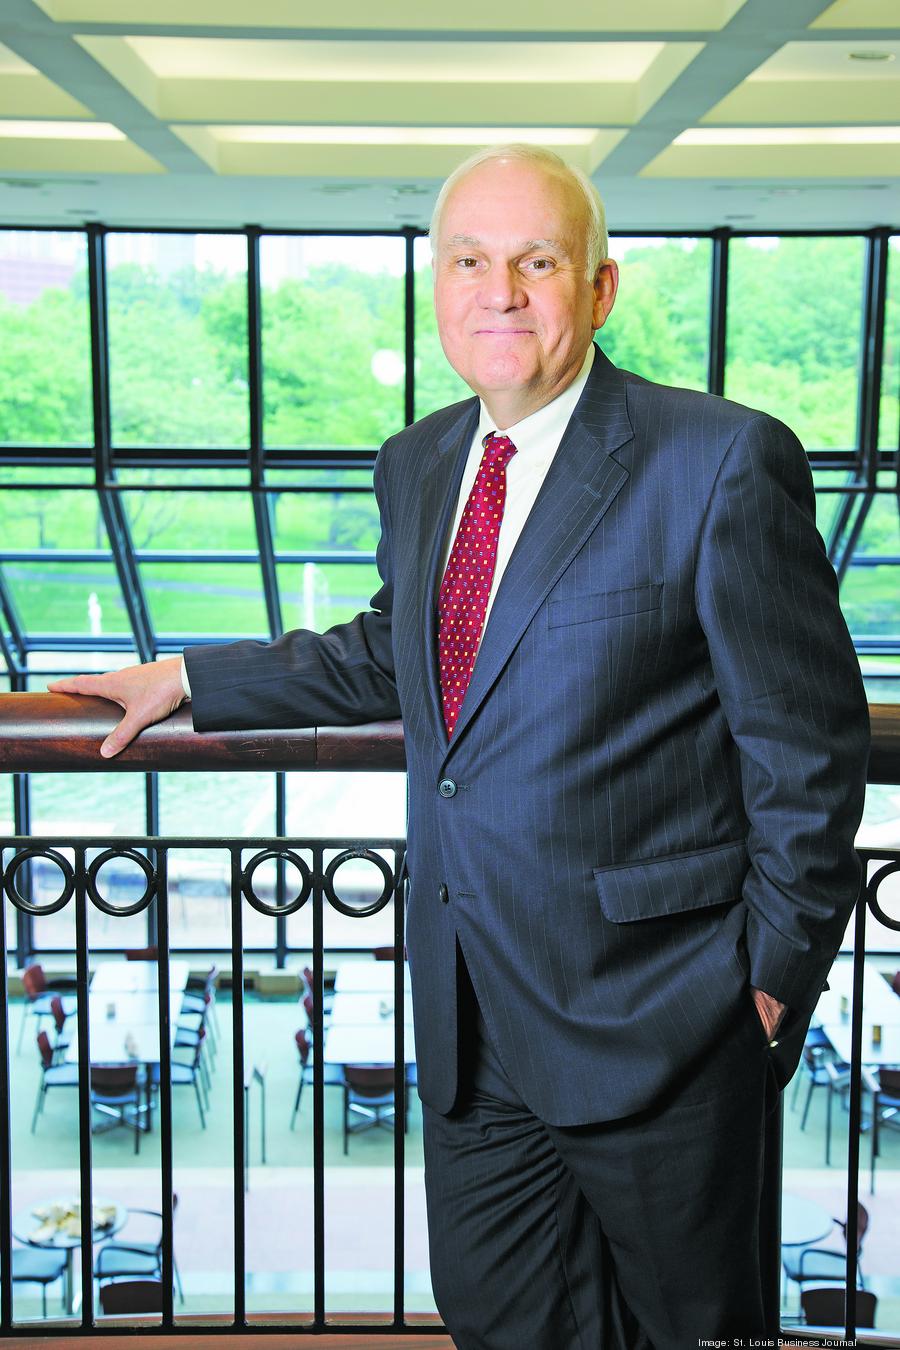 The Top 150 Privately Held Companies in 2013 - St. Louis Business Journal